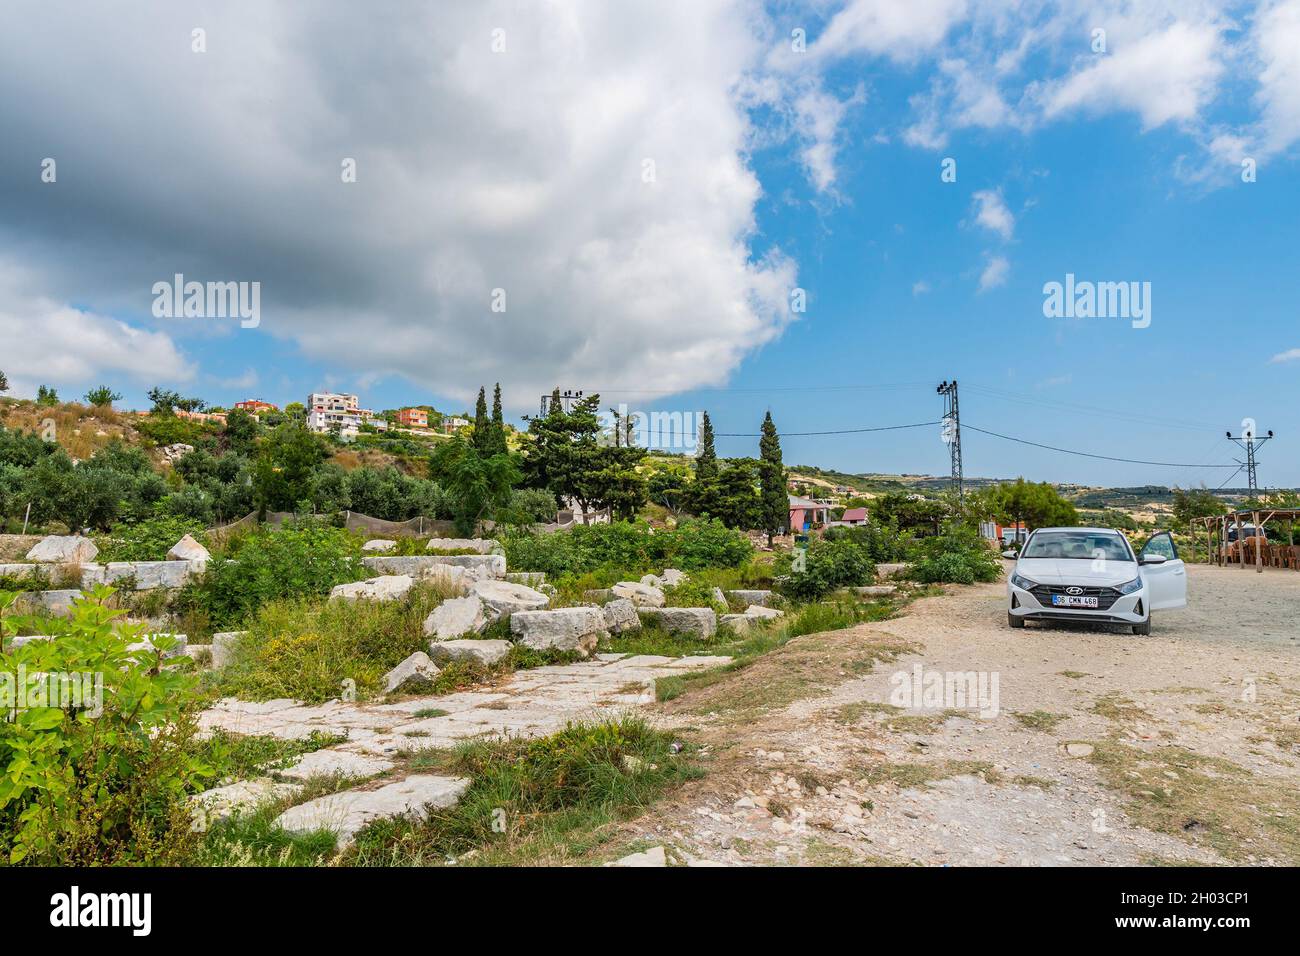 Hayat Samandag Landscape Breathtaking Picturesque View on a Blue Sky Day in Summer Stock Photo